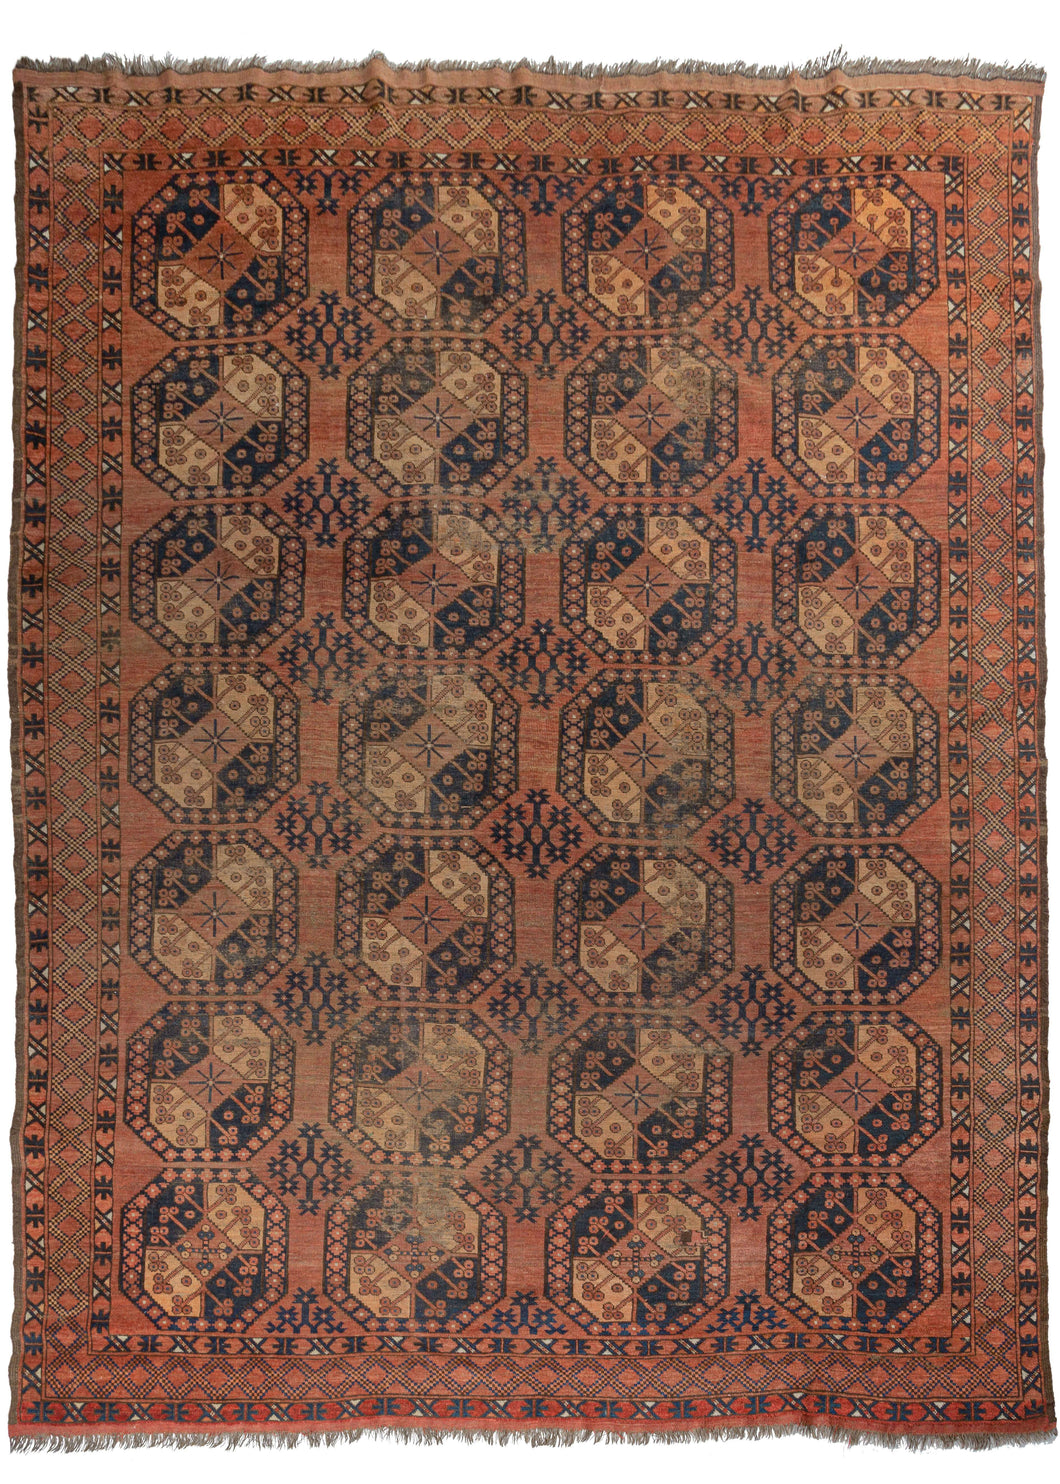 Antique Central Asian Ersari Turkmen rug featuring a traditional Ersari gül design on a soft peachy-pink ground, with soft orange, brown and navy completing the color palette. The colors varies slightly throughout with a moment of deeper red near one end.